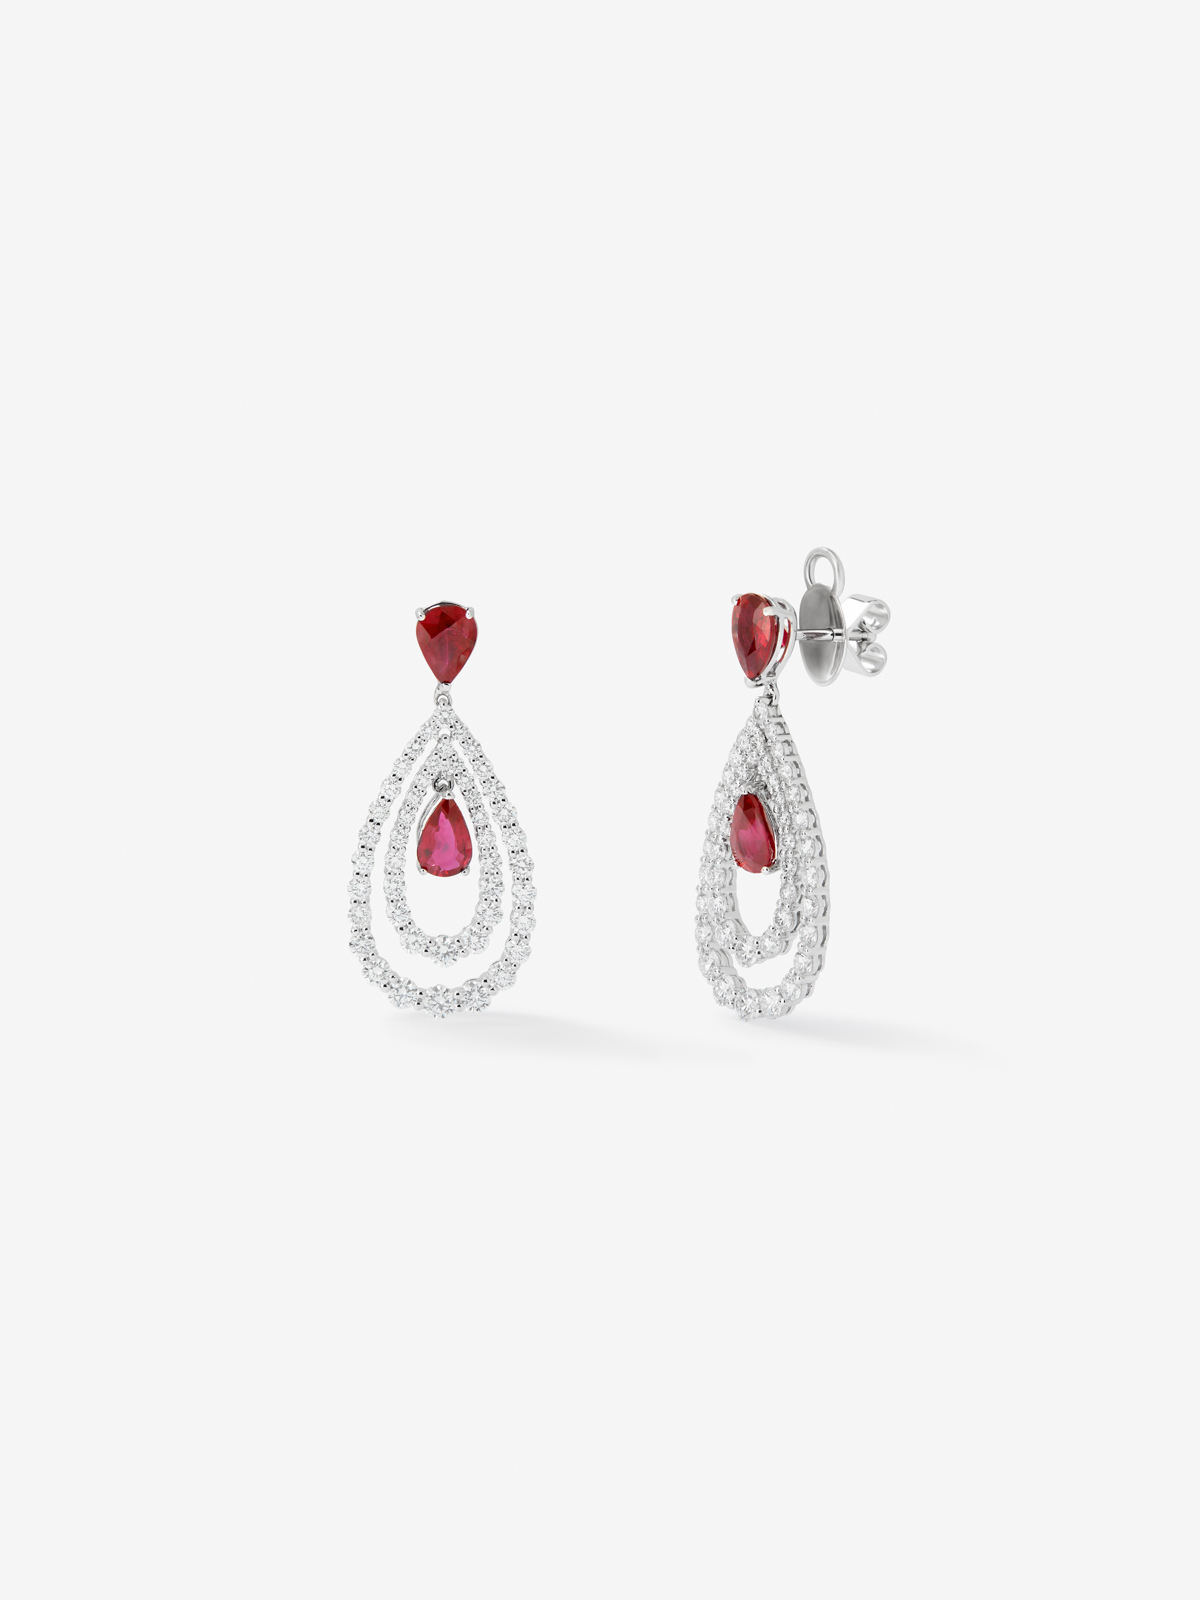 18K white gold earrings with white diamonds in bright size of 3 cts and red rubies in 3,13 cts pear size